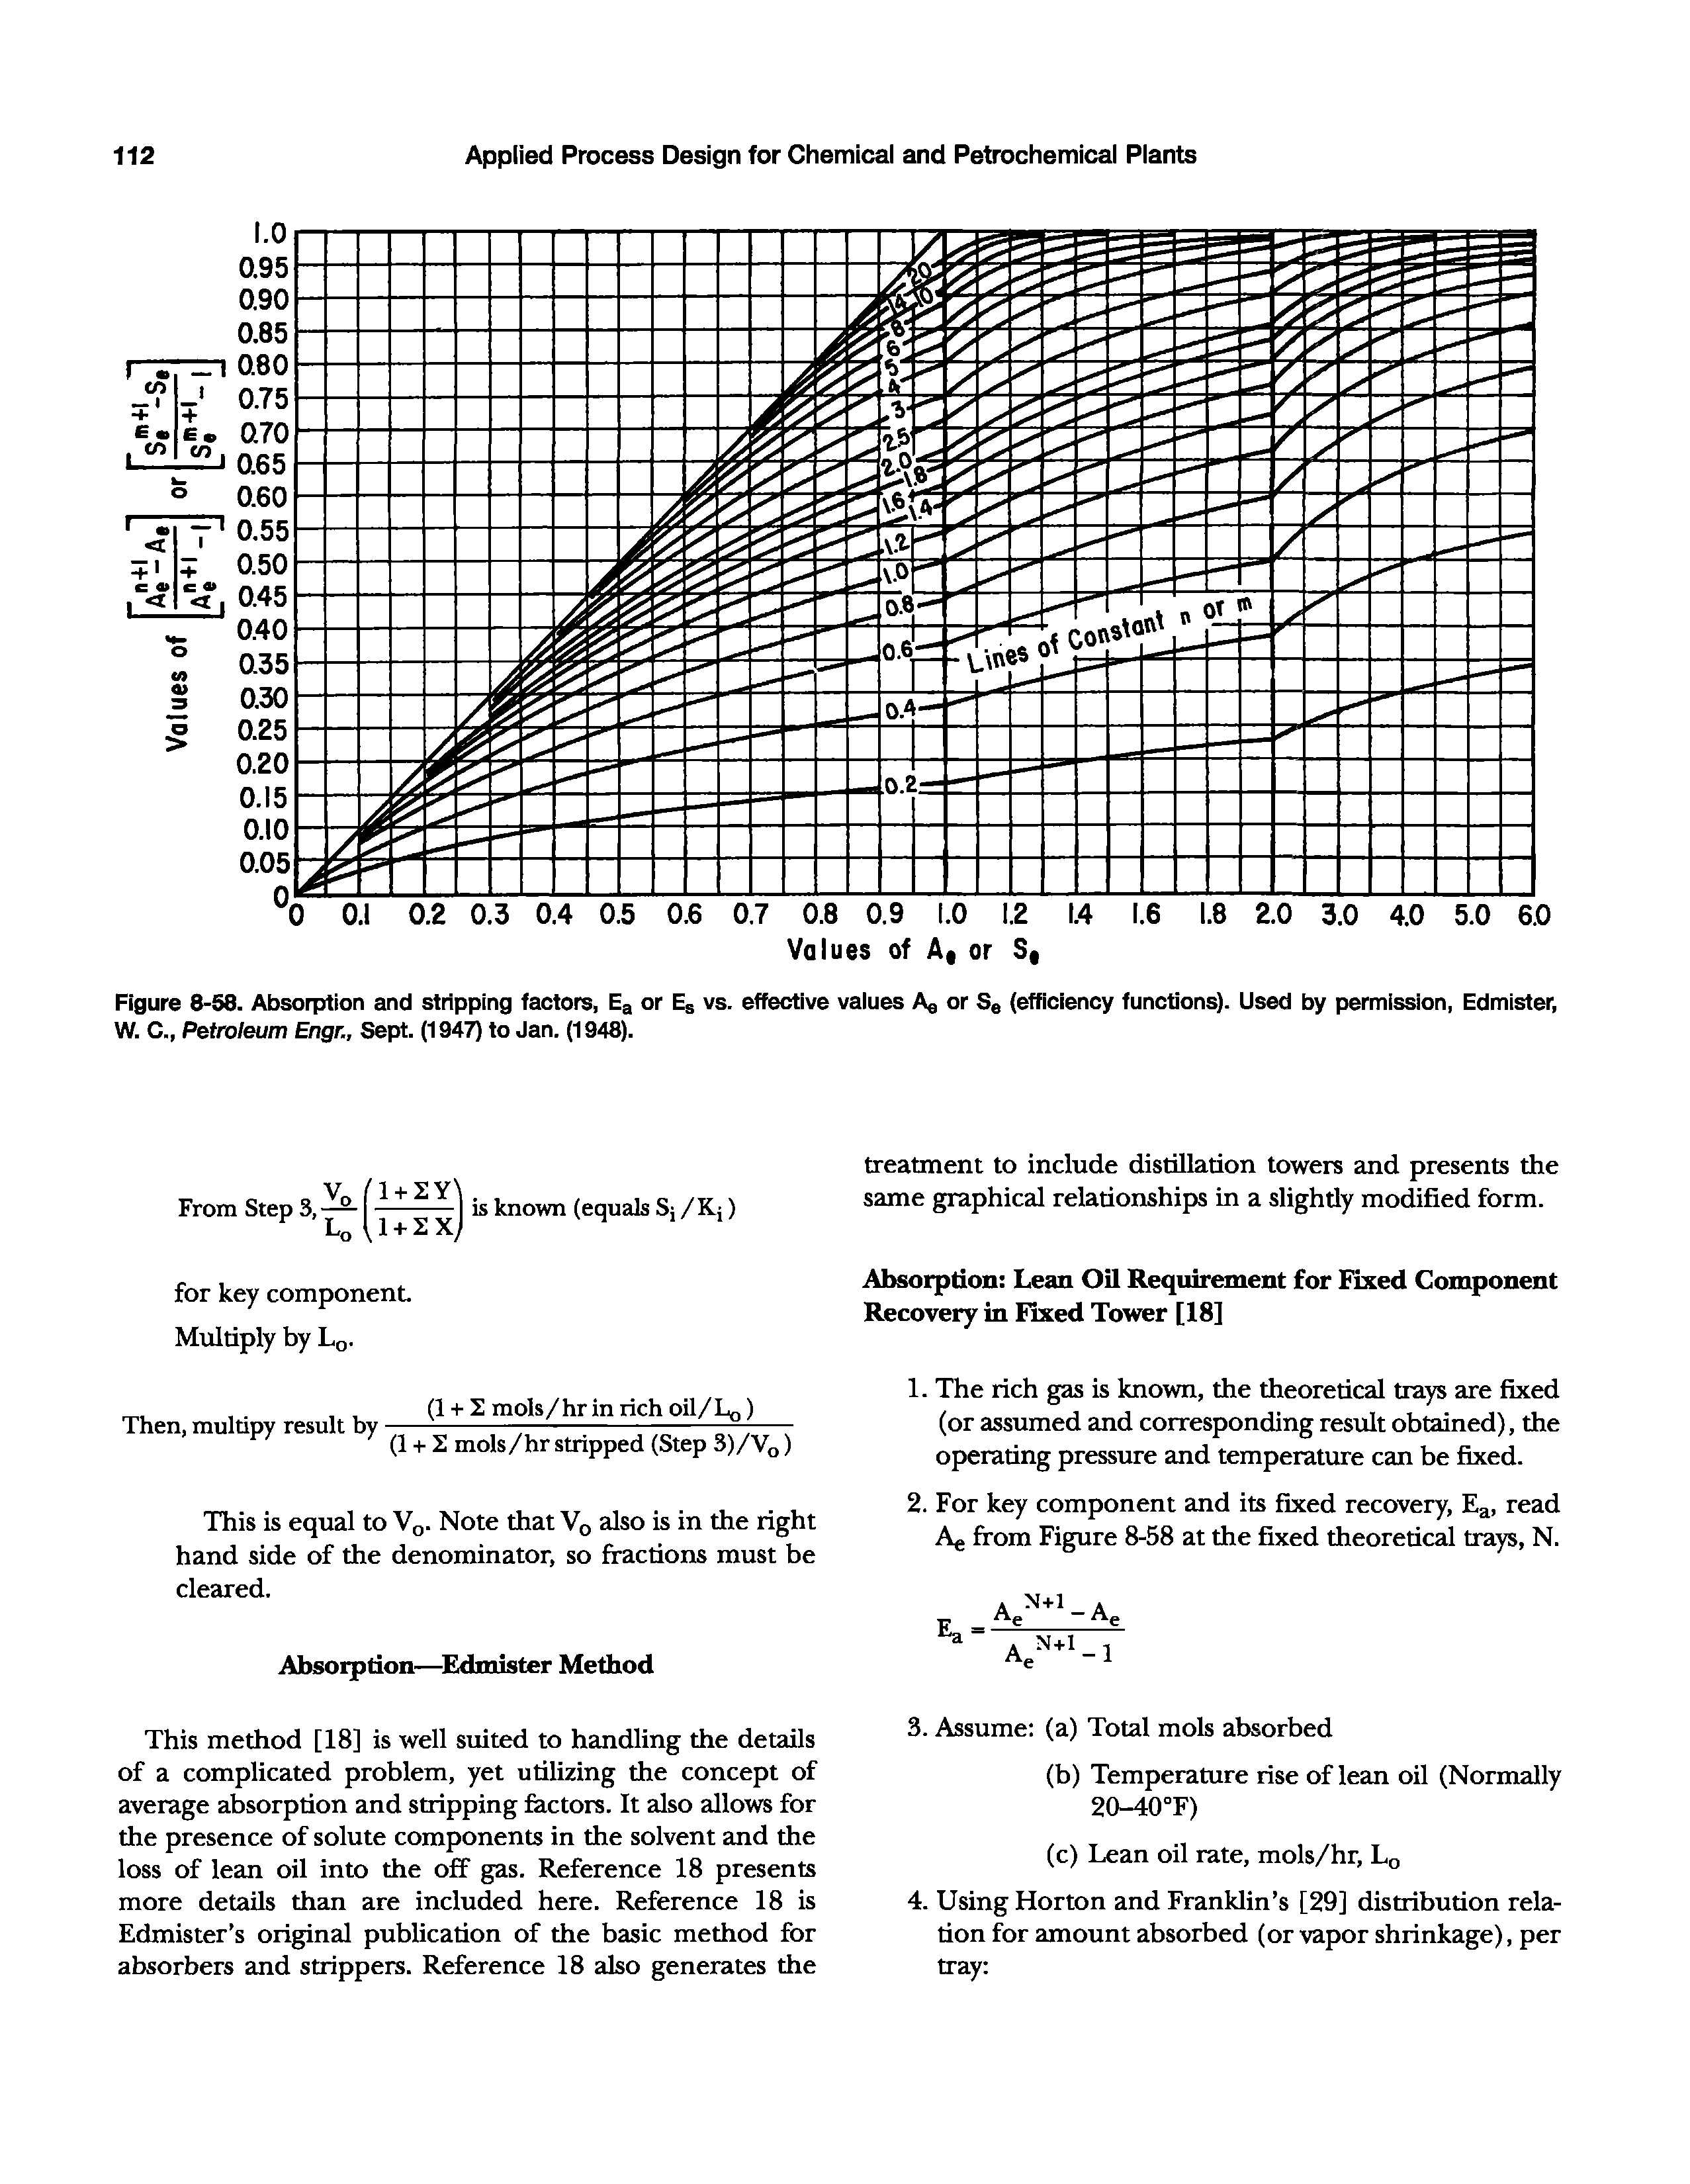 Figure 8-58. Absorption and stripping factors, Ea or Eg vs. effective values Ag or Se (efficiency functions). Used by permission, Edmister, W. C., Petroleum Engr., Sept. (194 to Jan. (1948).